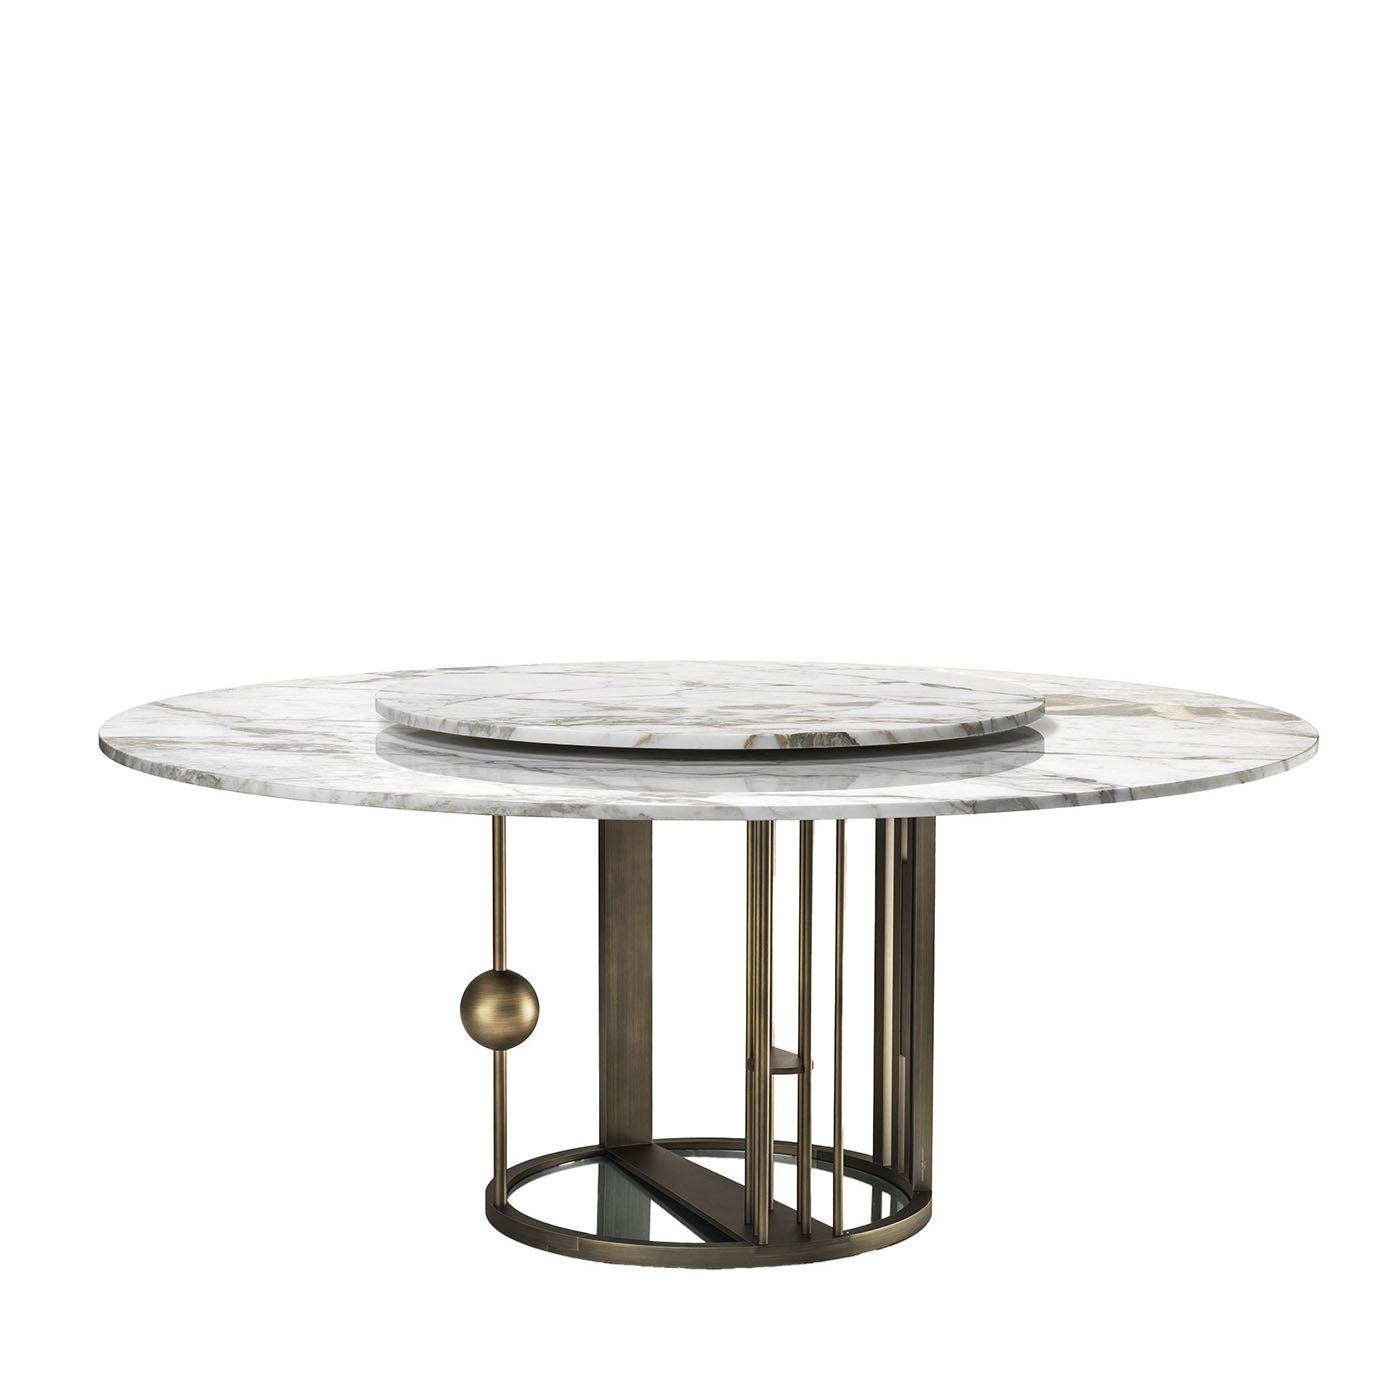 Merlino Round Metal & Marble Dining Table by Paolo Rizzatto - Main view